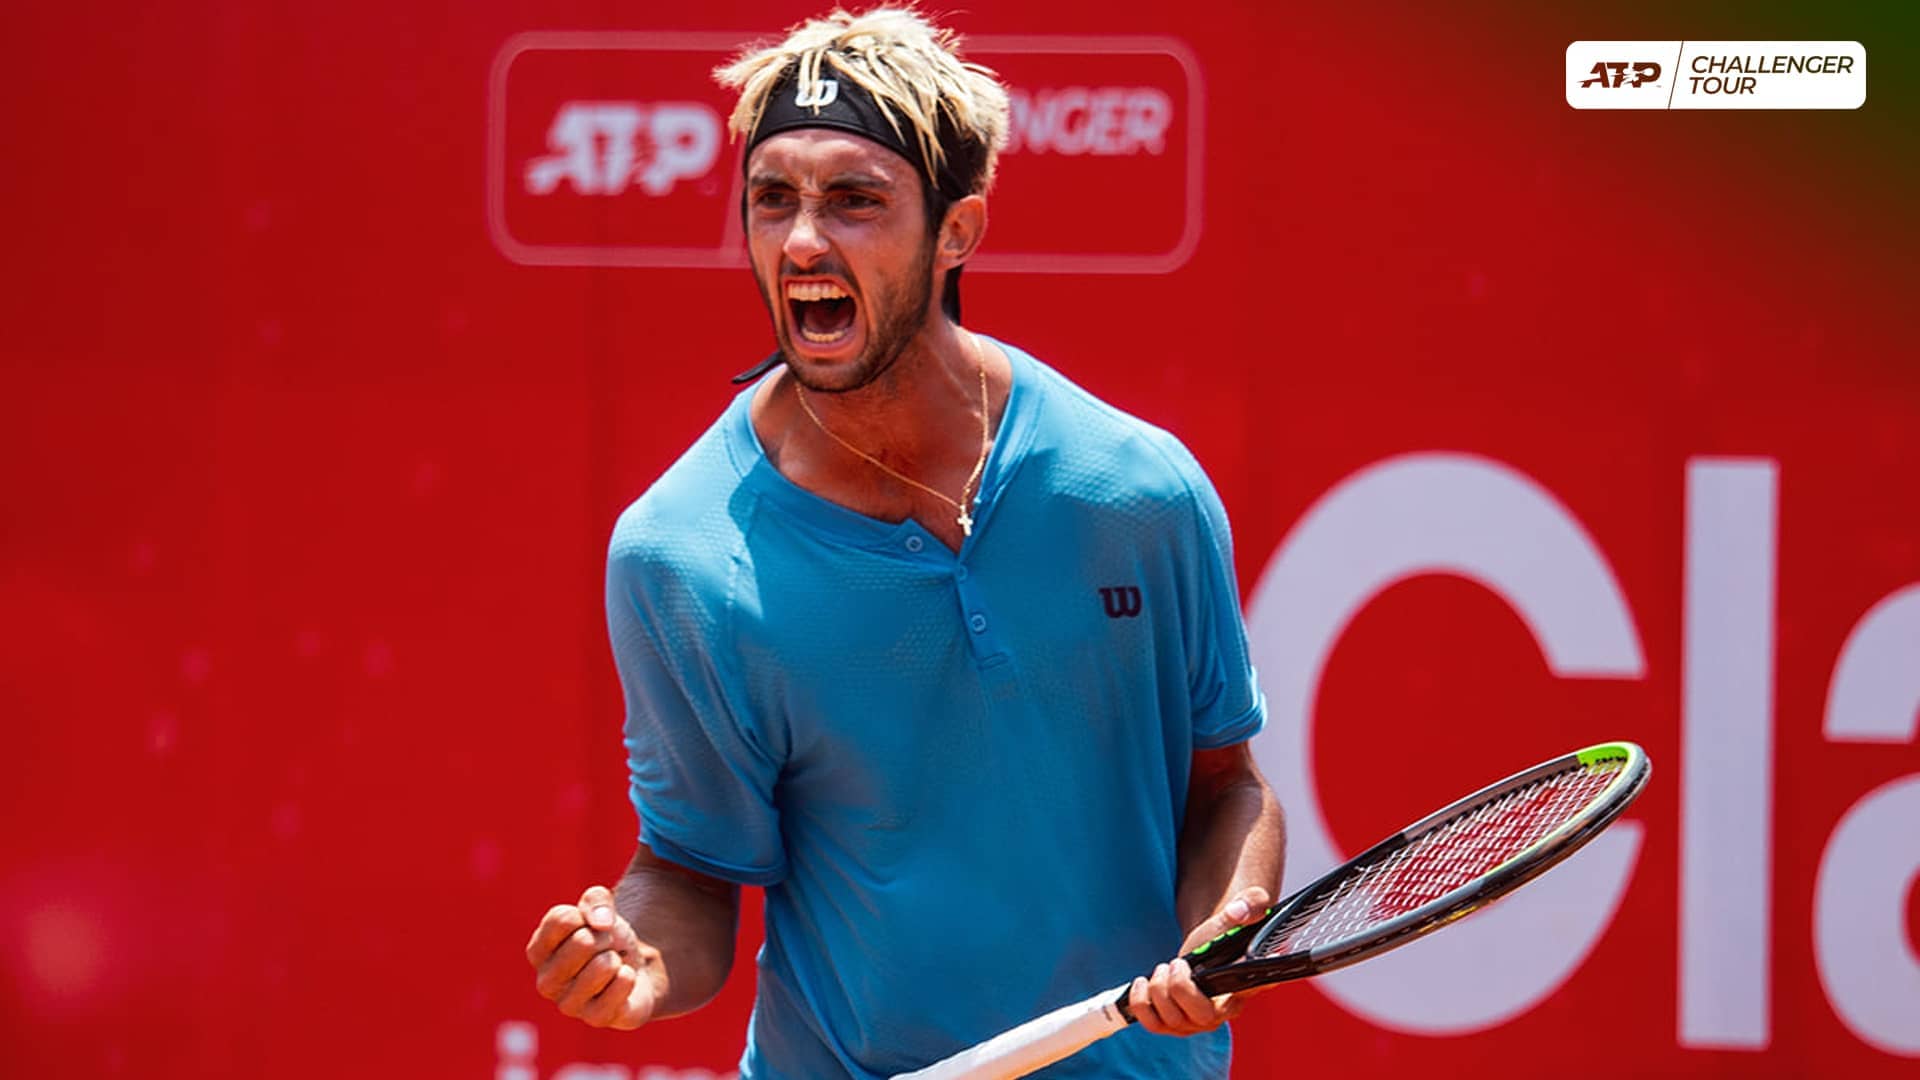 Watch Hot Shots 19-Year-old Tirante On Fire In Reaching First Challenger Final ATP Tour Tennis